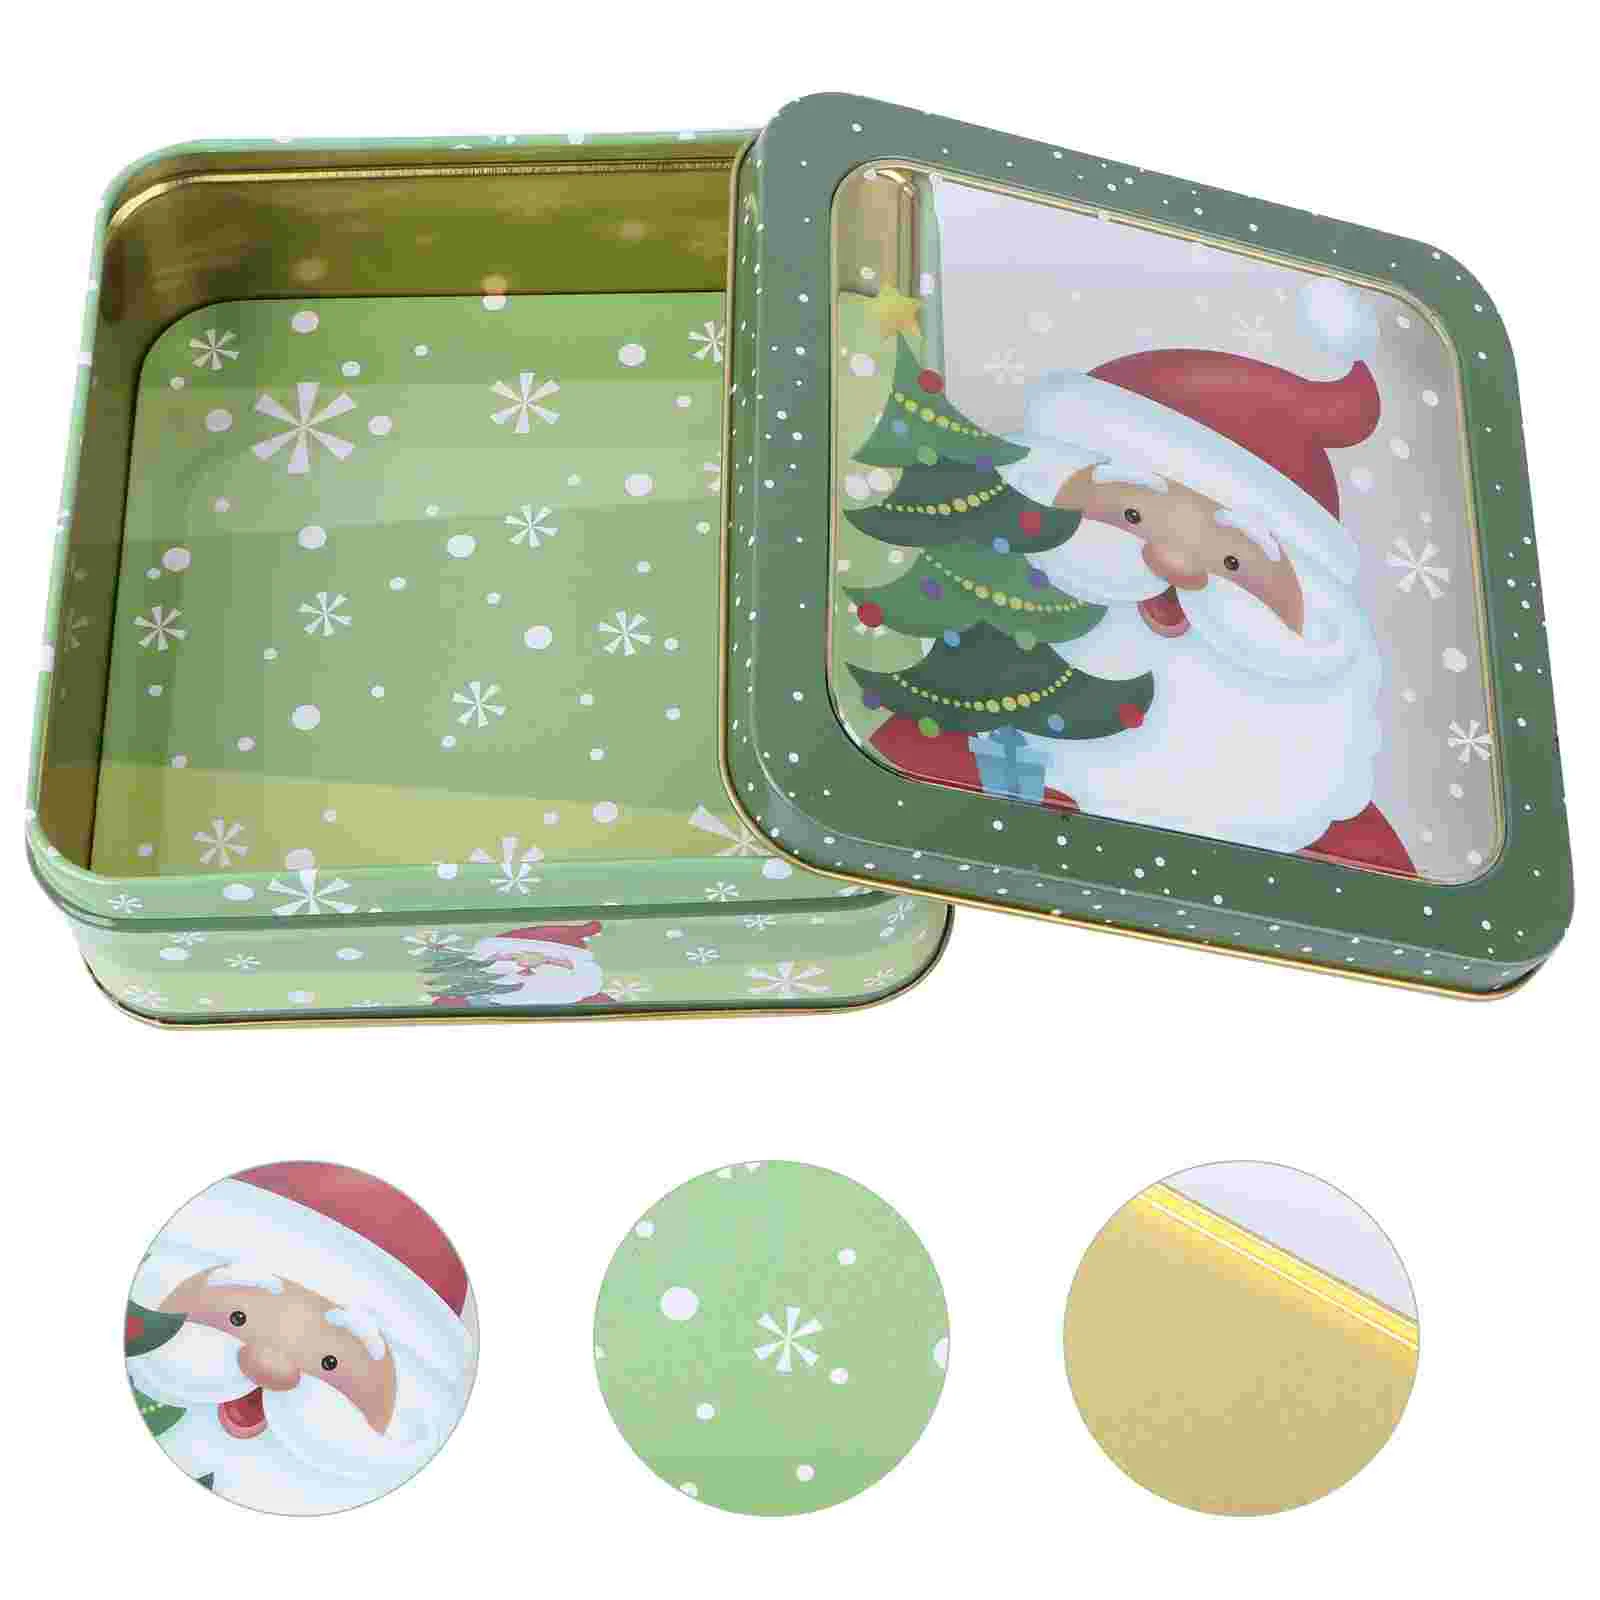 

Box Christmas Cookie Tinplate Gift Storage Metal Tin Tins Candy Jarboxes Lid Empty Lids Pack Squareswap Snack Party Decorative